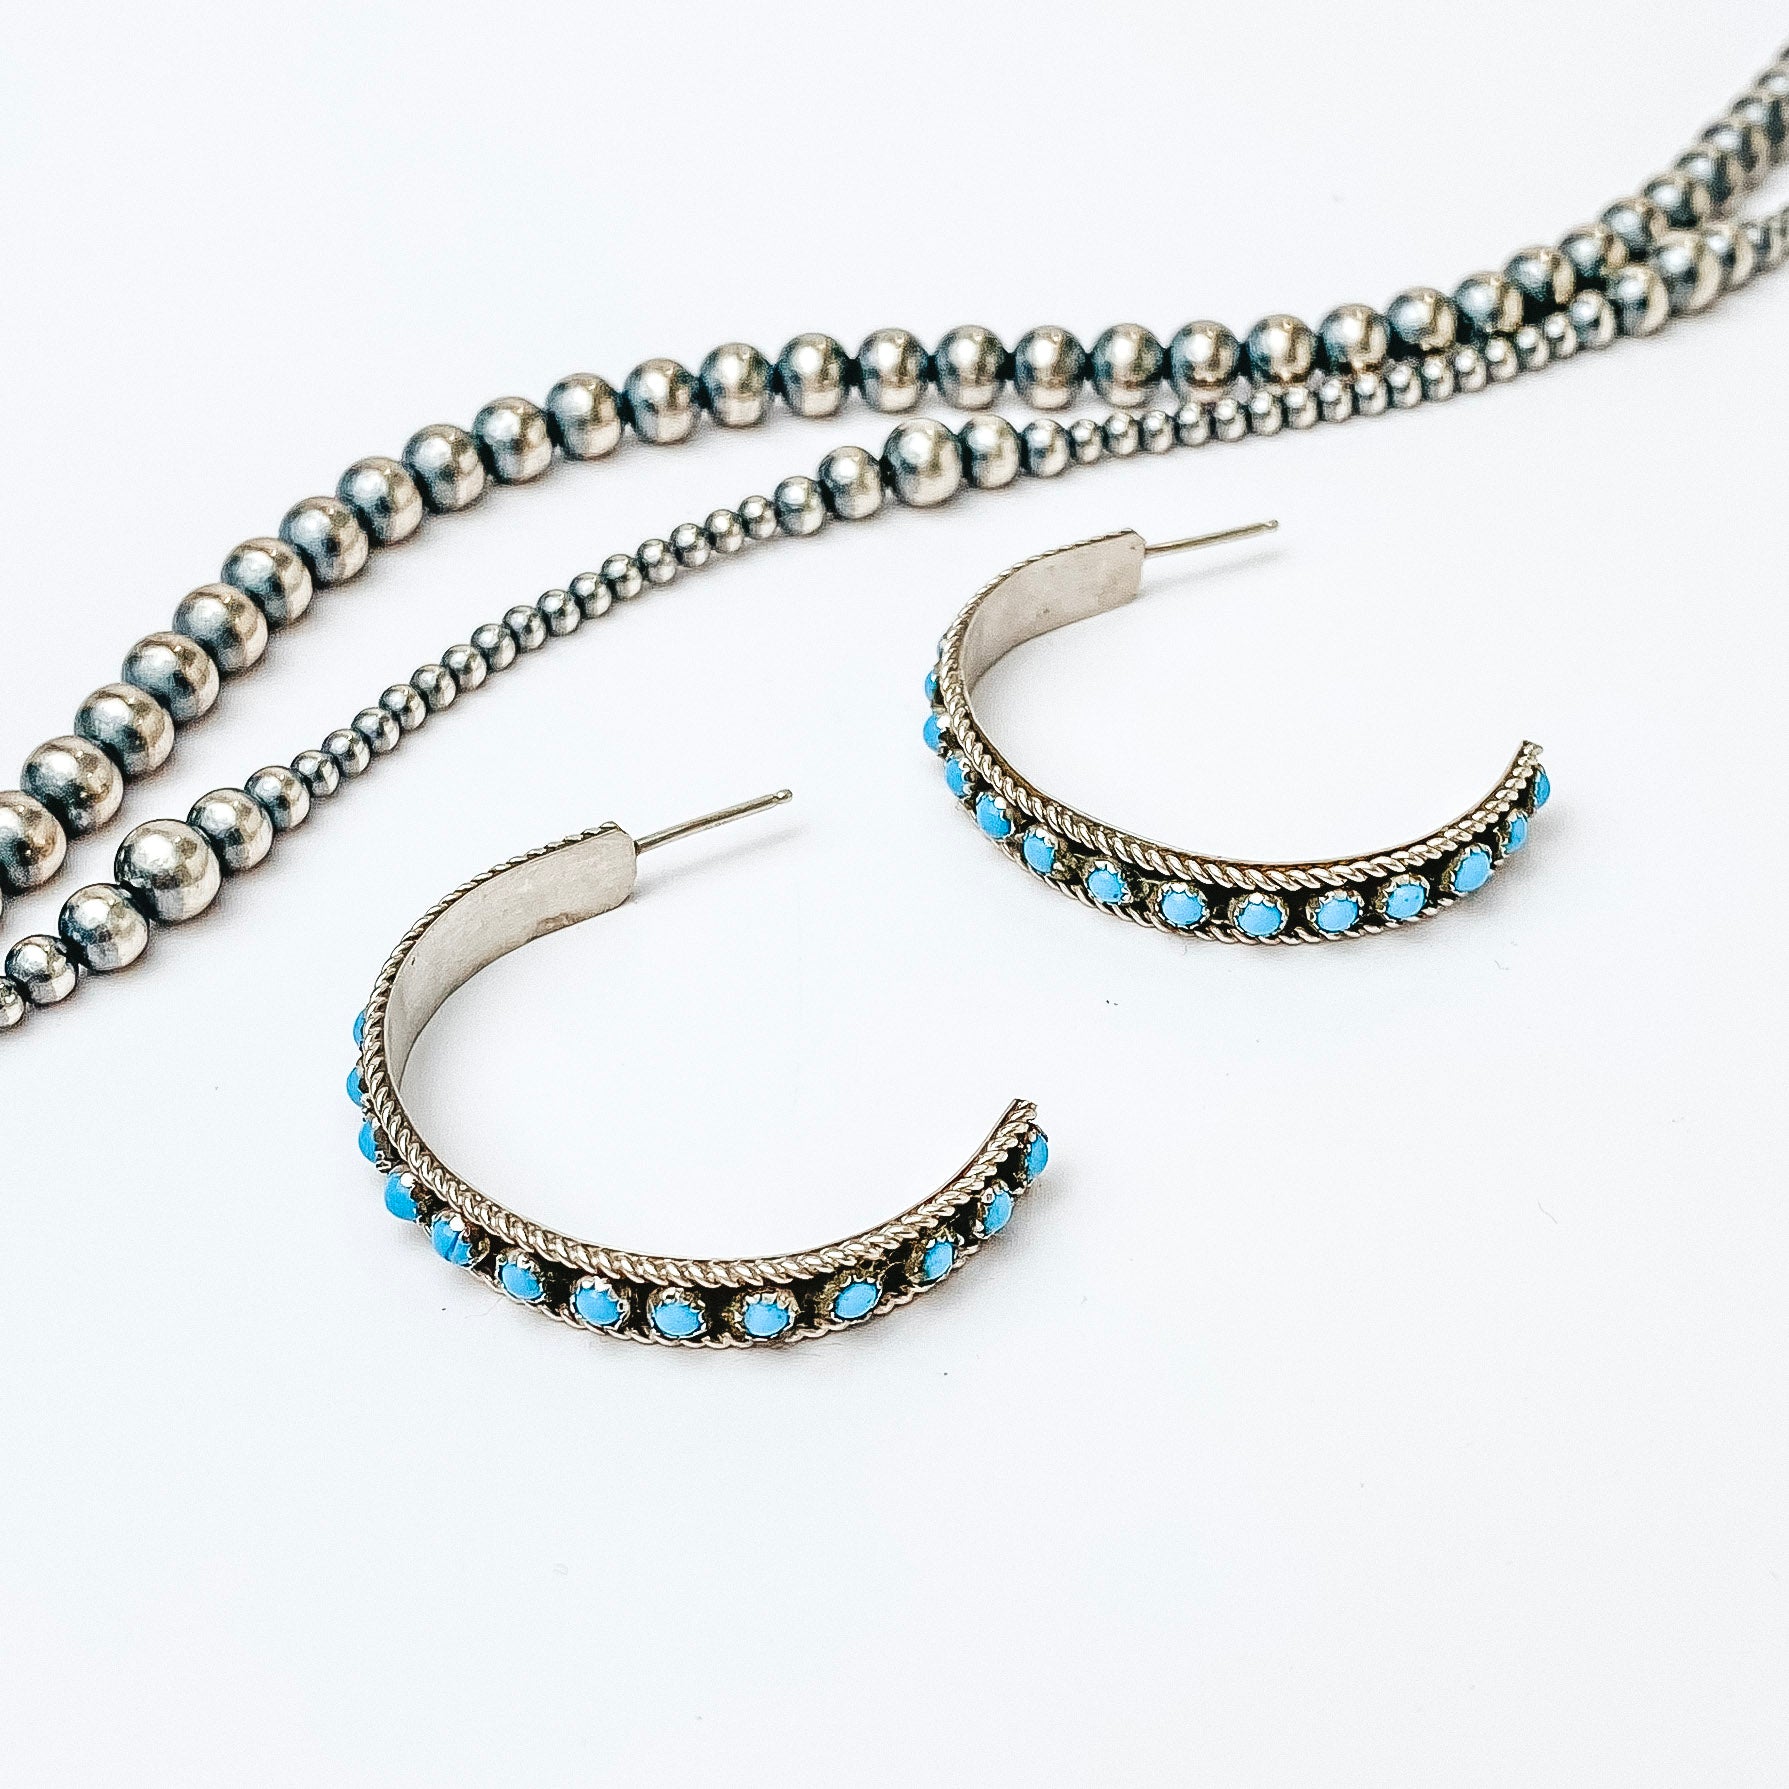 Chester Charley | Navajo Handmade Genuine Sterling Silver Hoops with Turquoise Stones - Giddy Up Glamour Boutique